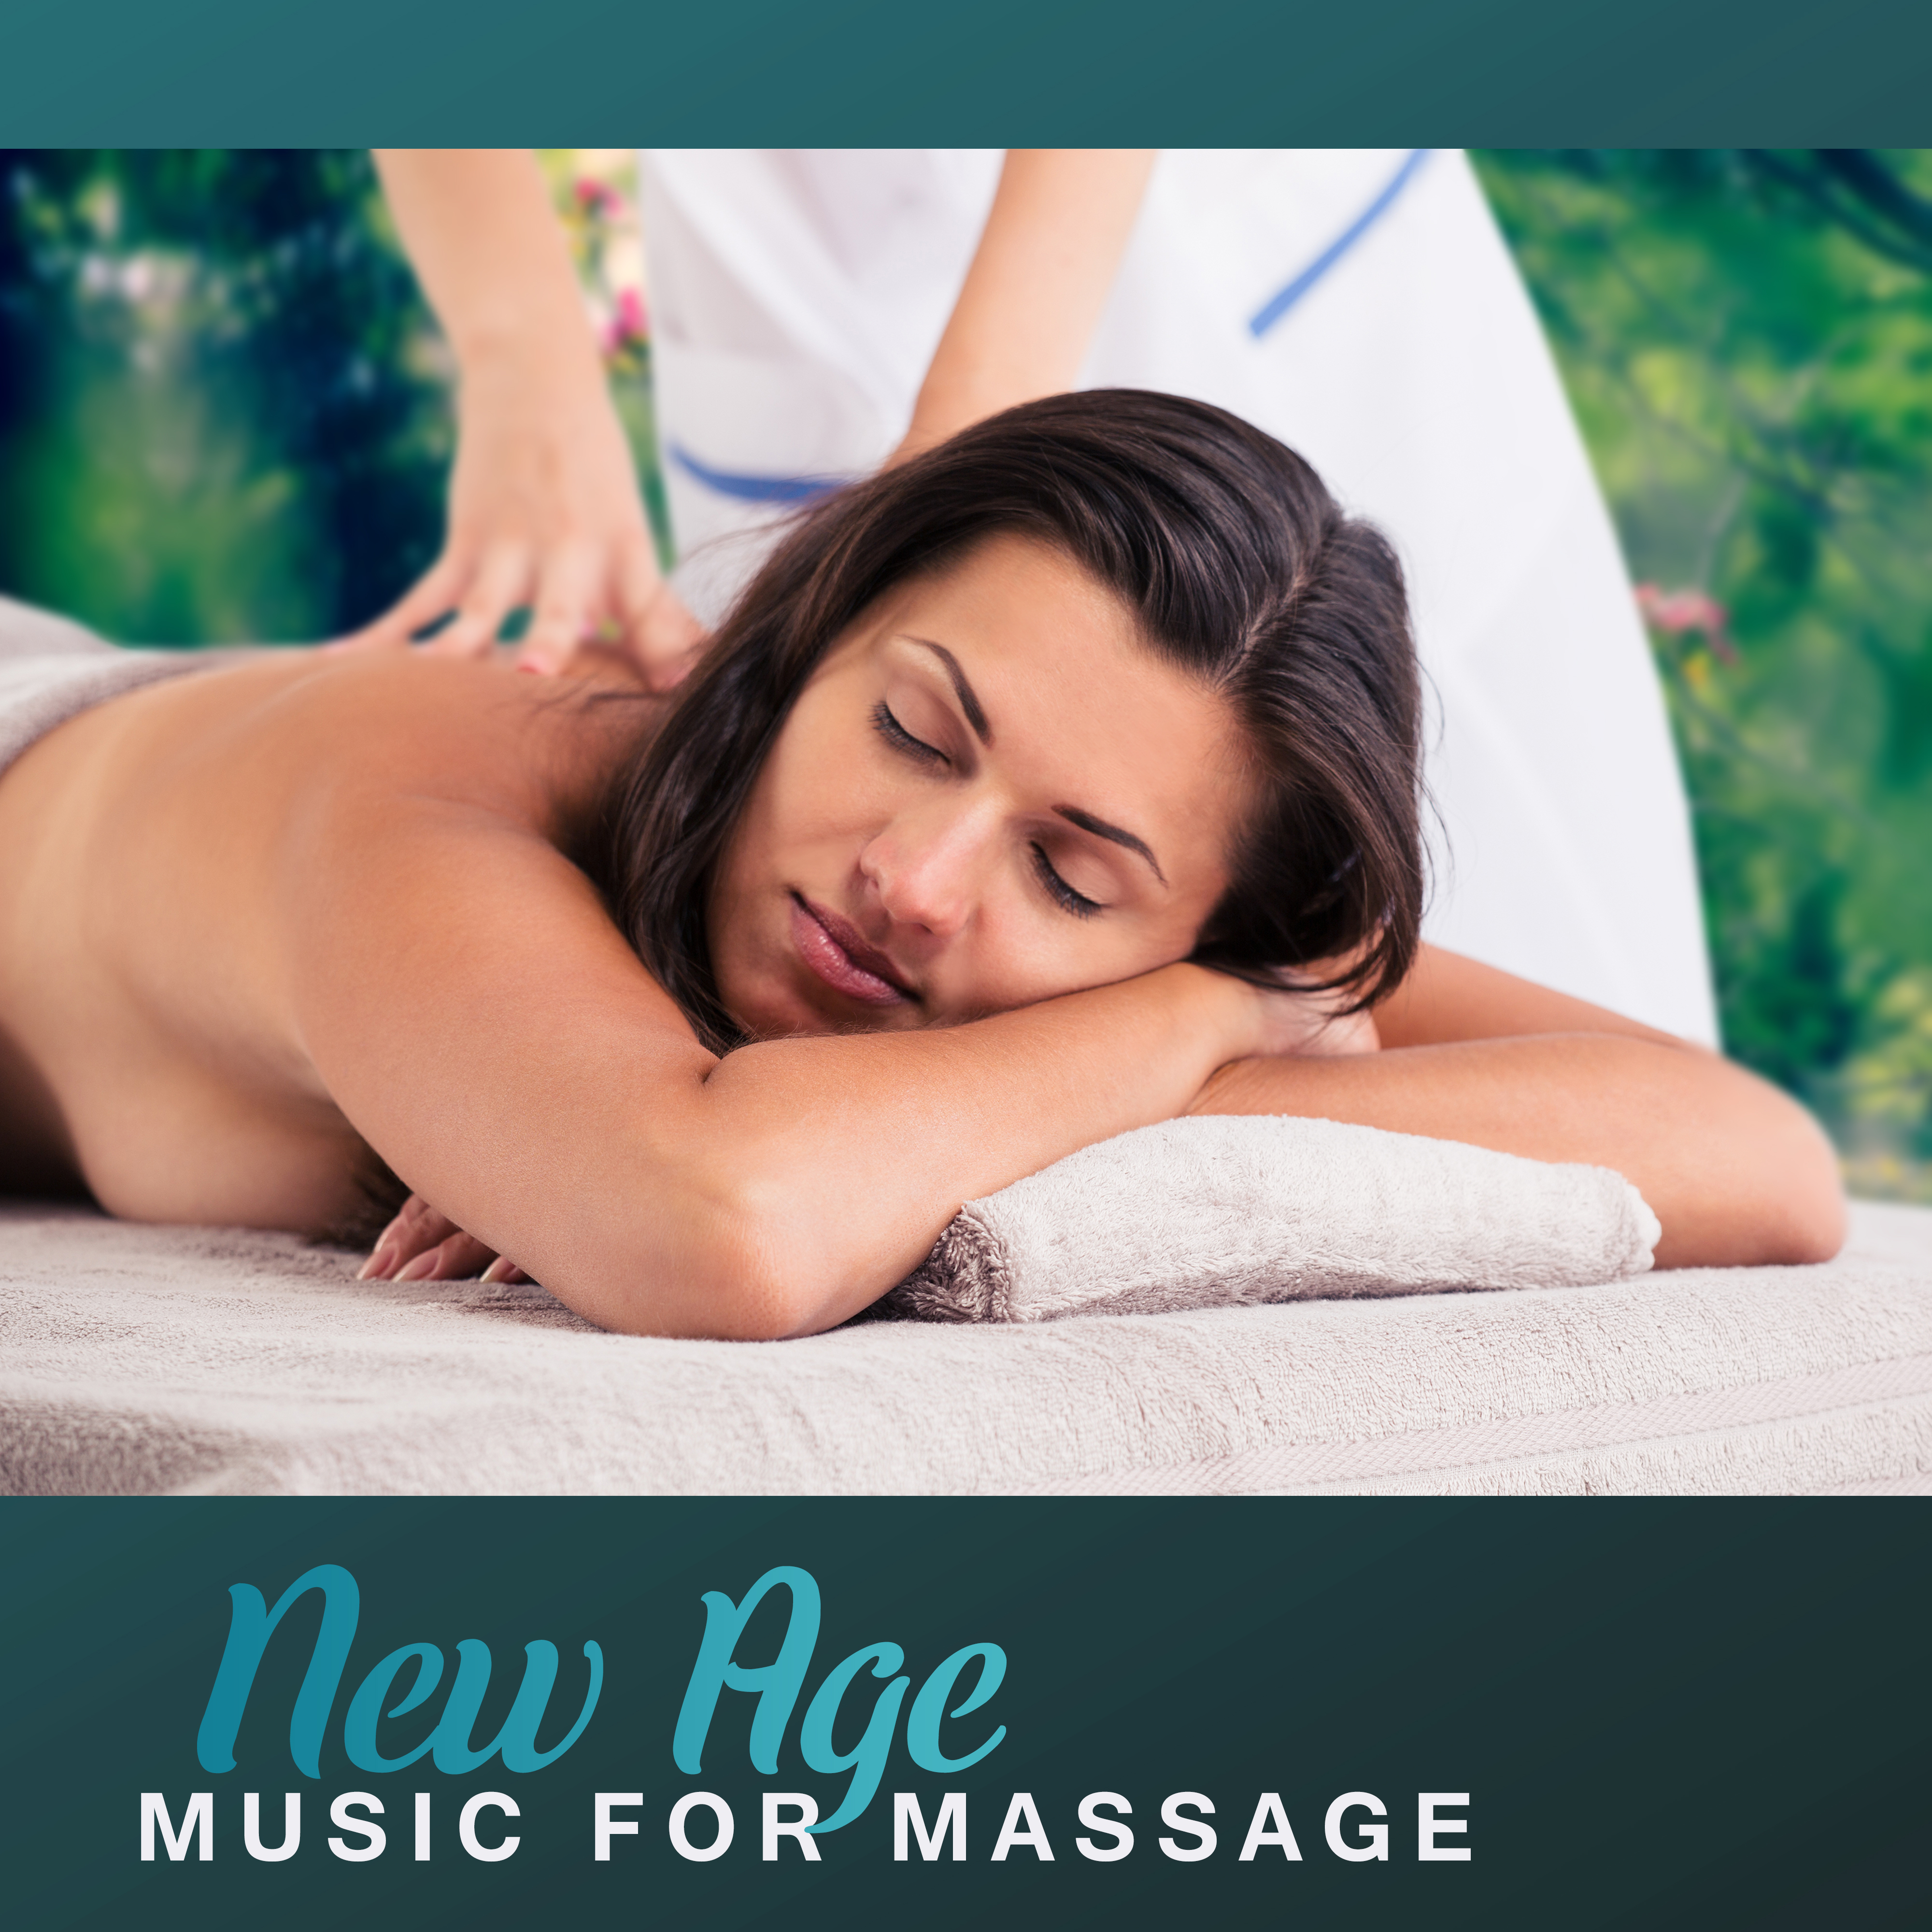 New Age Music for Massage – Hot Stone Massage, Peaceful Waves, Calming Waves, Stress Relief